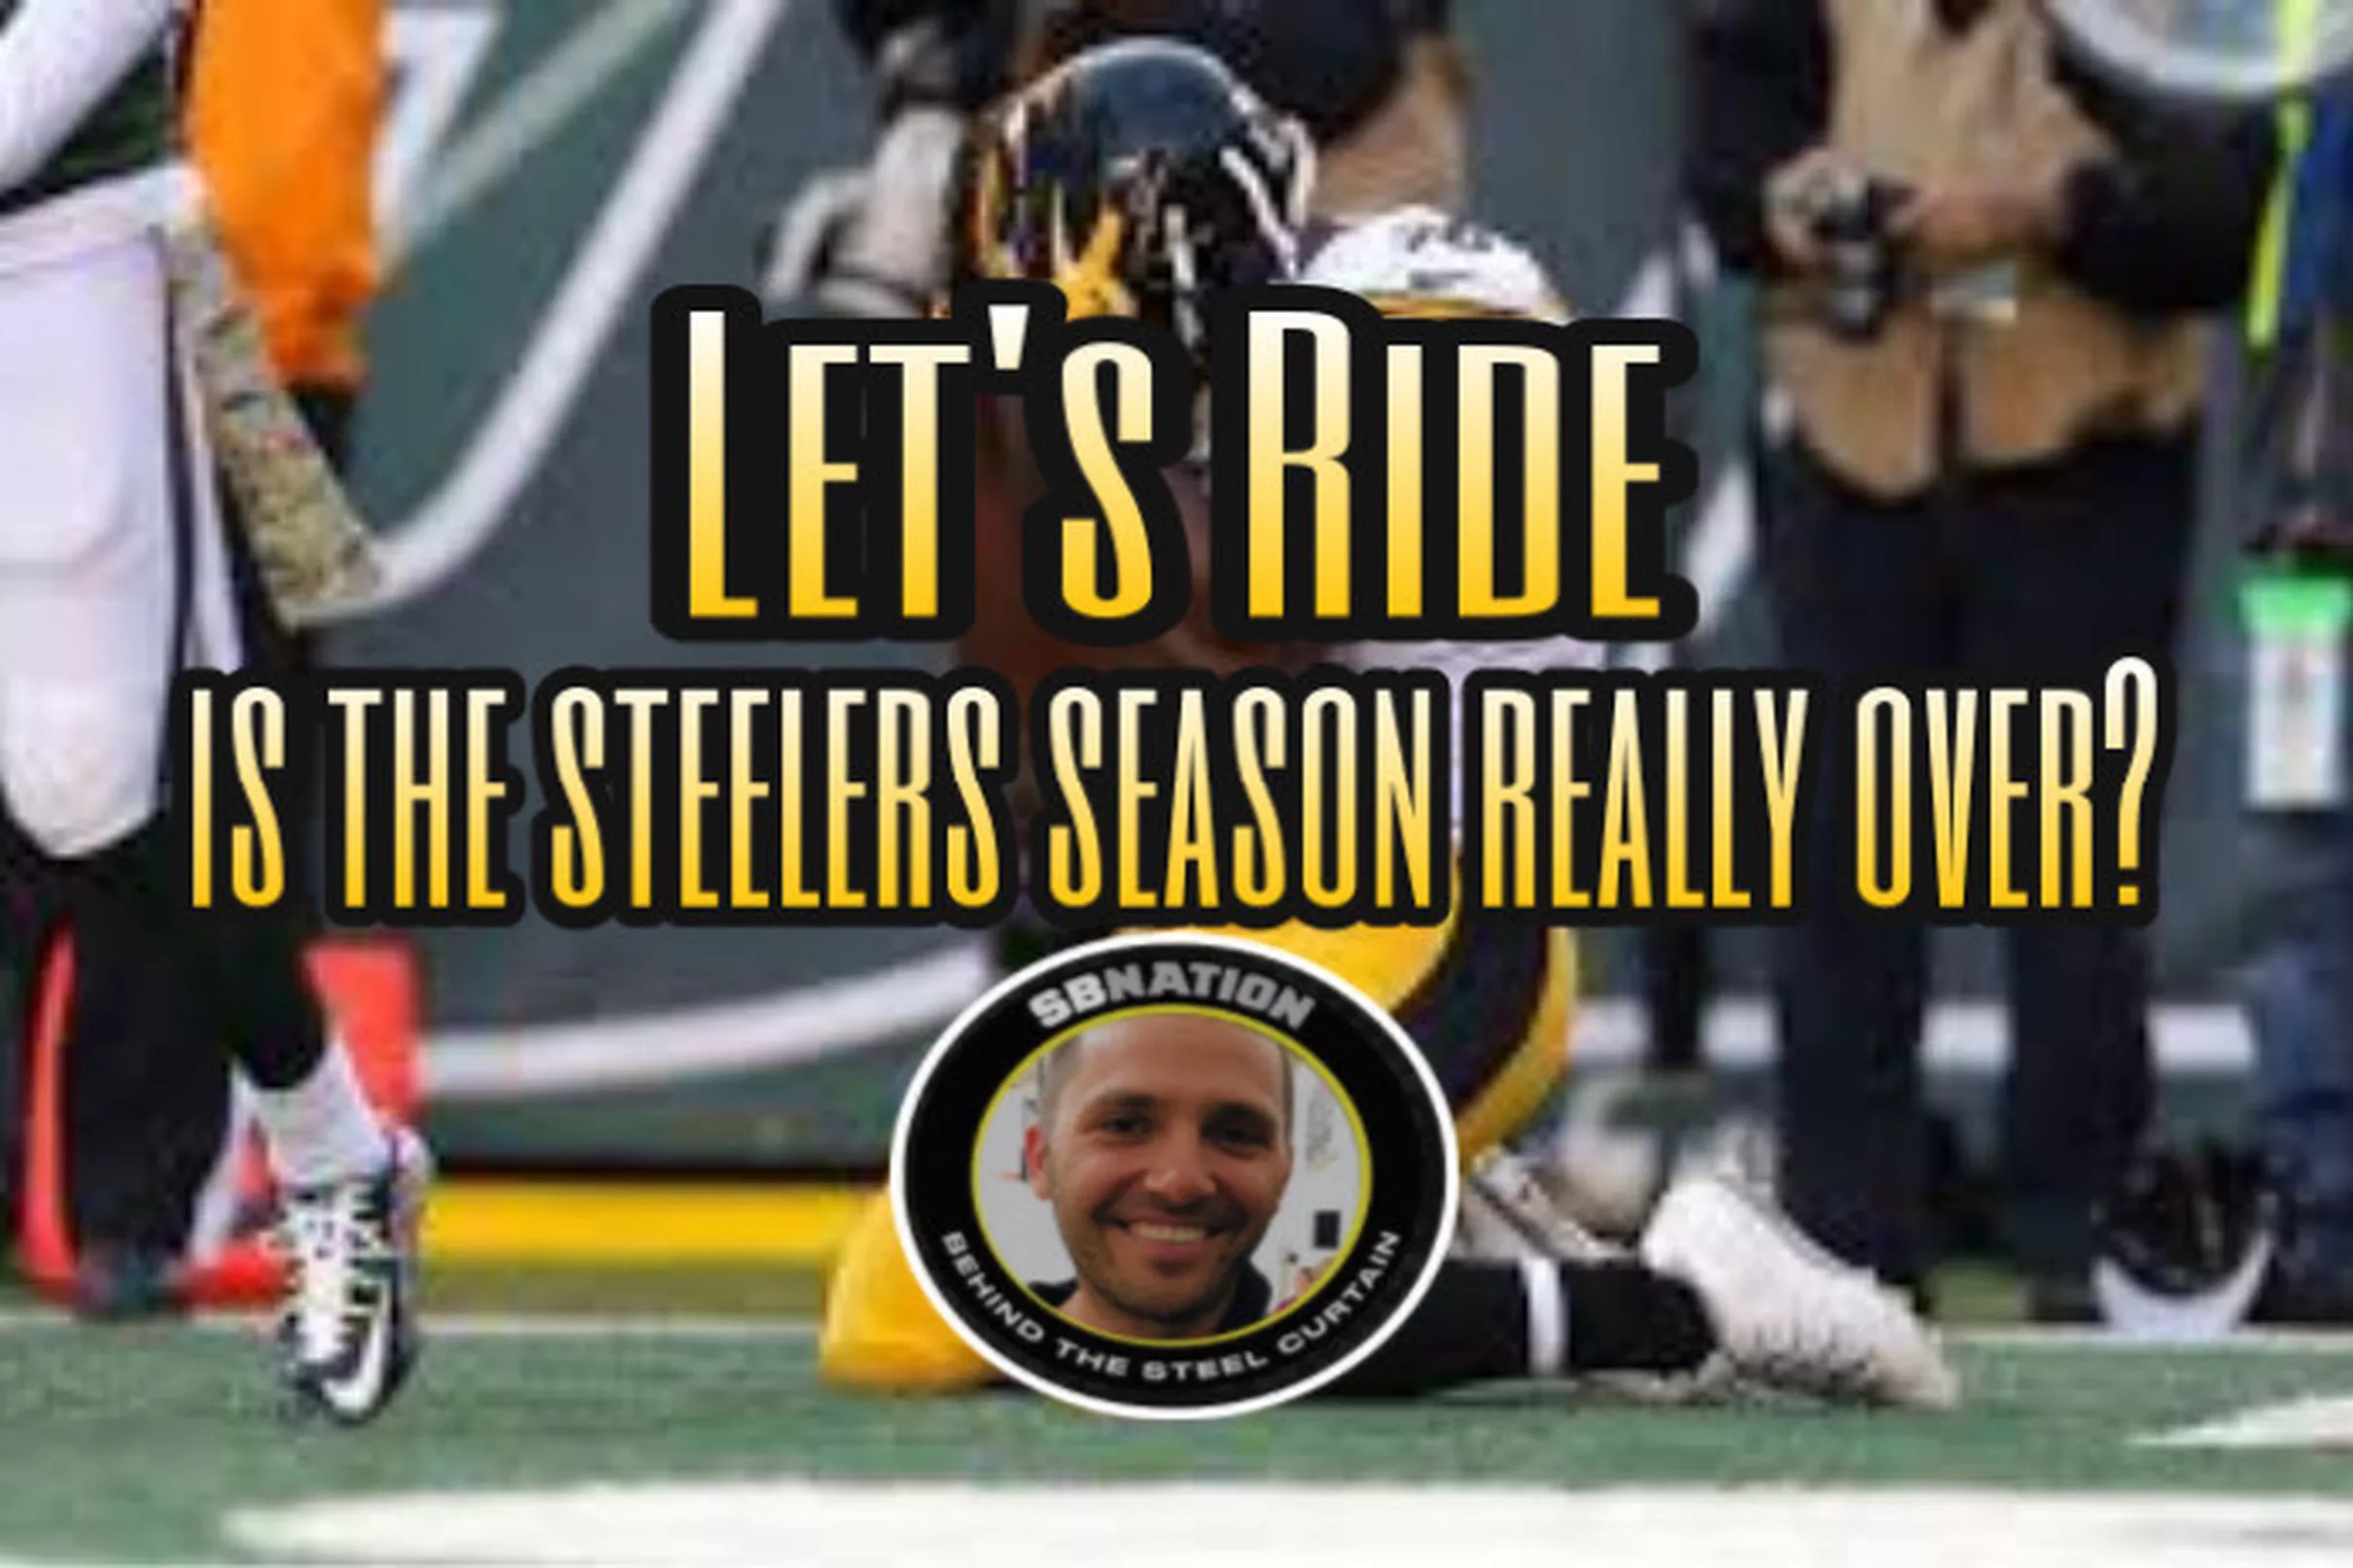 Steelers Podcast Is the Steelers season really over?